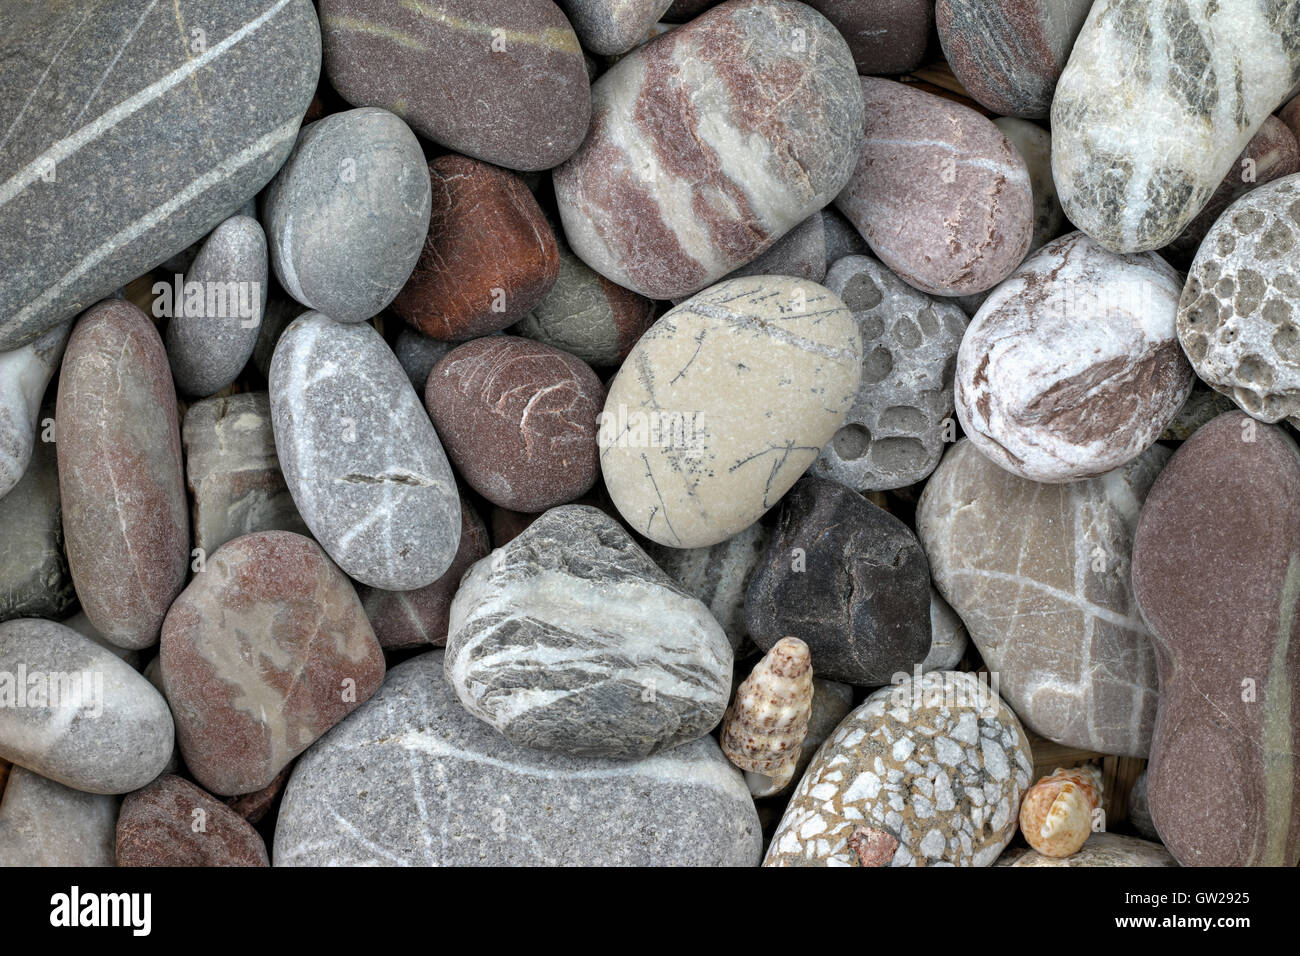 Stone background - pebbles in earth colors Stock Photo